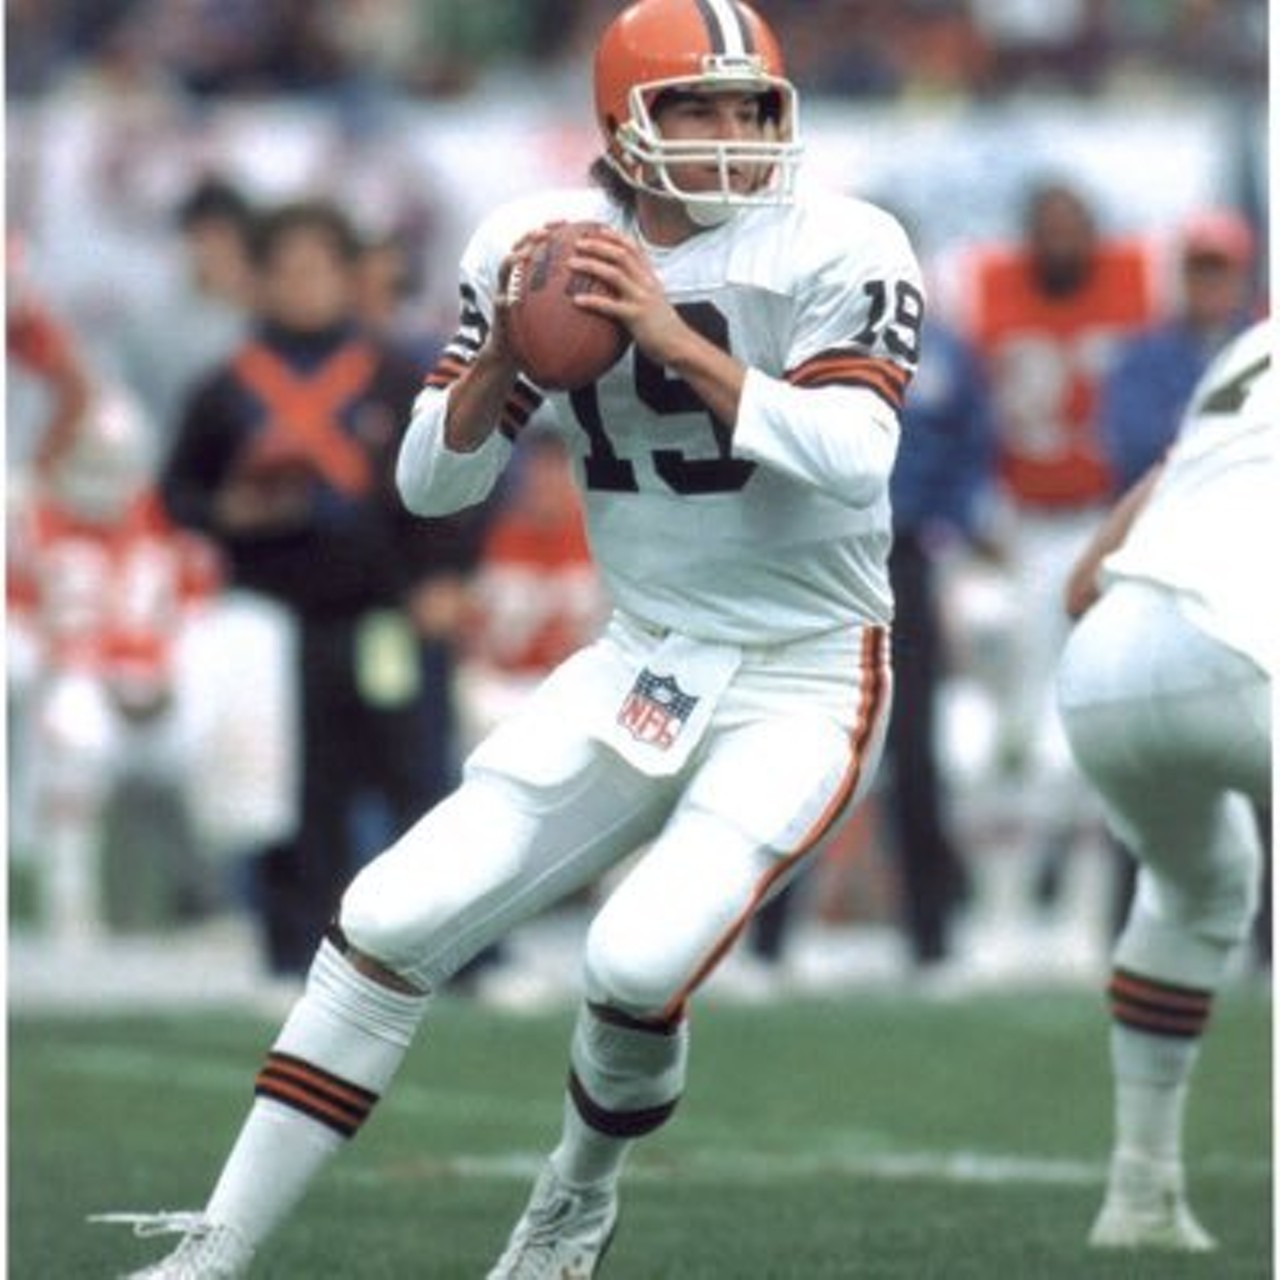 Bernie Kosar was overrated.
There&#146;s nothing we hold on to like sports of the bygone eras, and the last time the Browns had any consistently decent teams, Kosar was under center, so you better not say a bad word about him.
Photo via Scene Archives